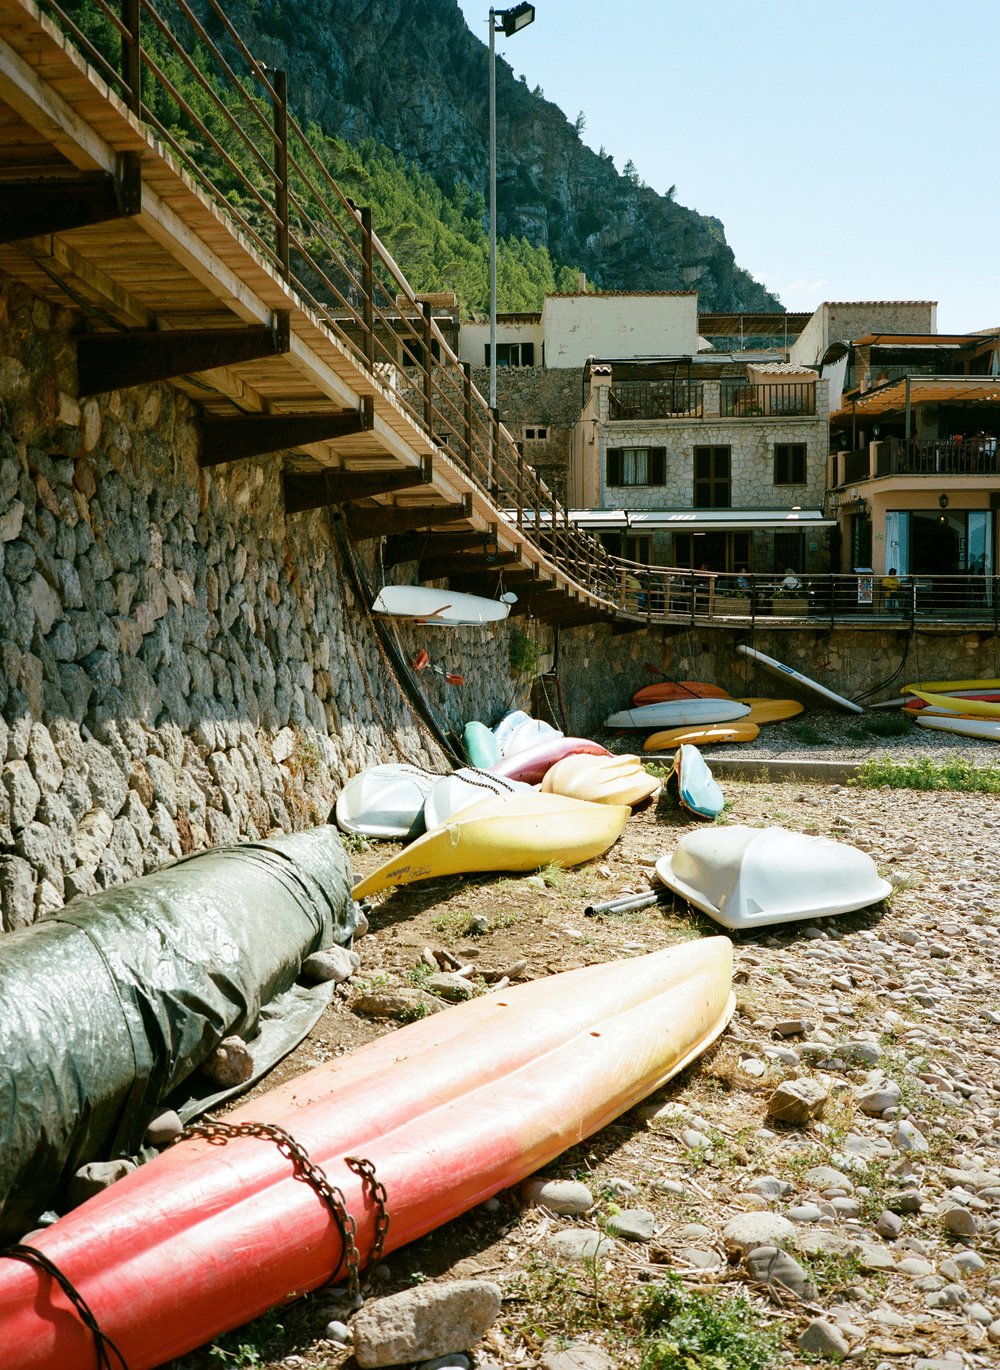  turned over kayaks and boats on rocky beach town in Mallorca, Spain 